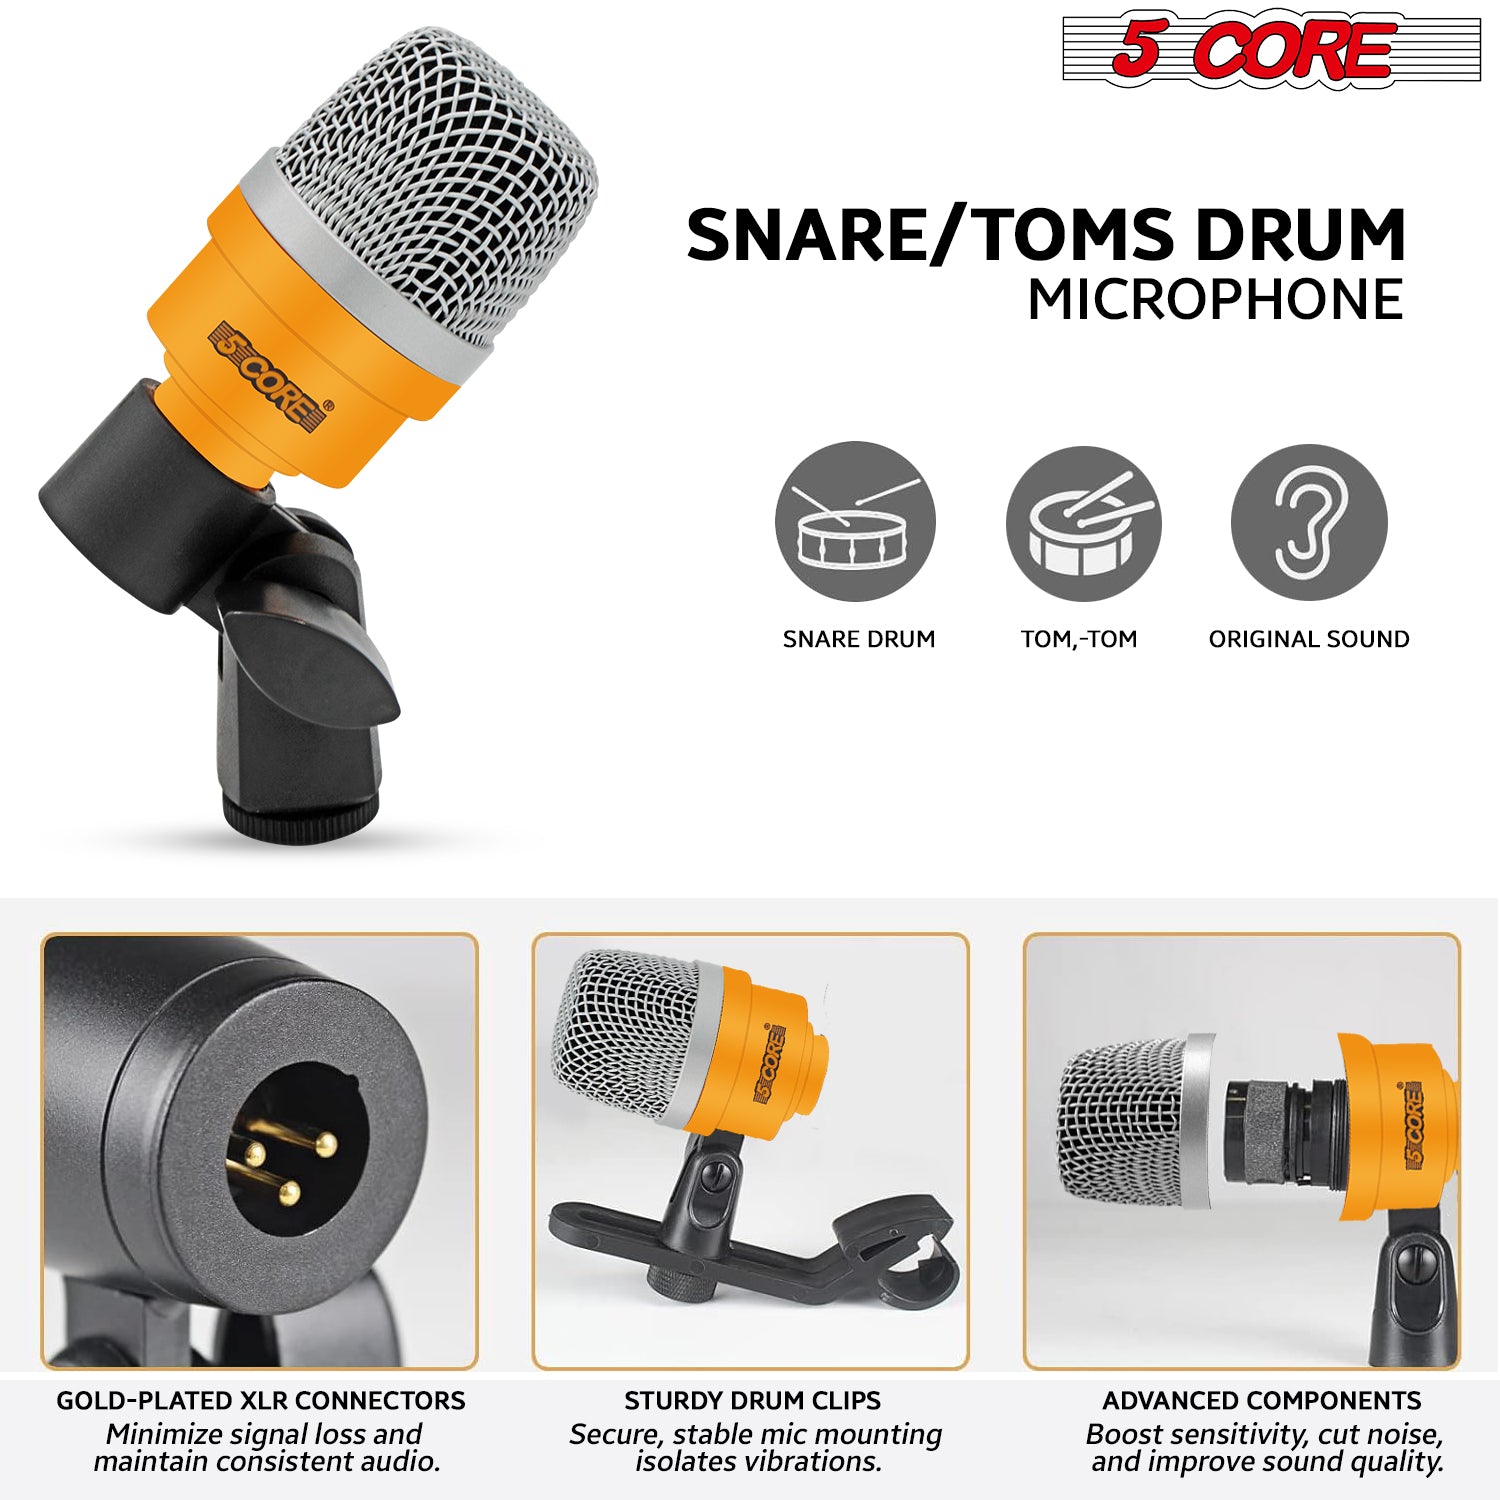 Dynamic XLR microphone ensemble in striking yellow, perfect for stage performances.